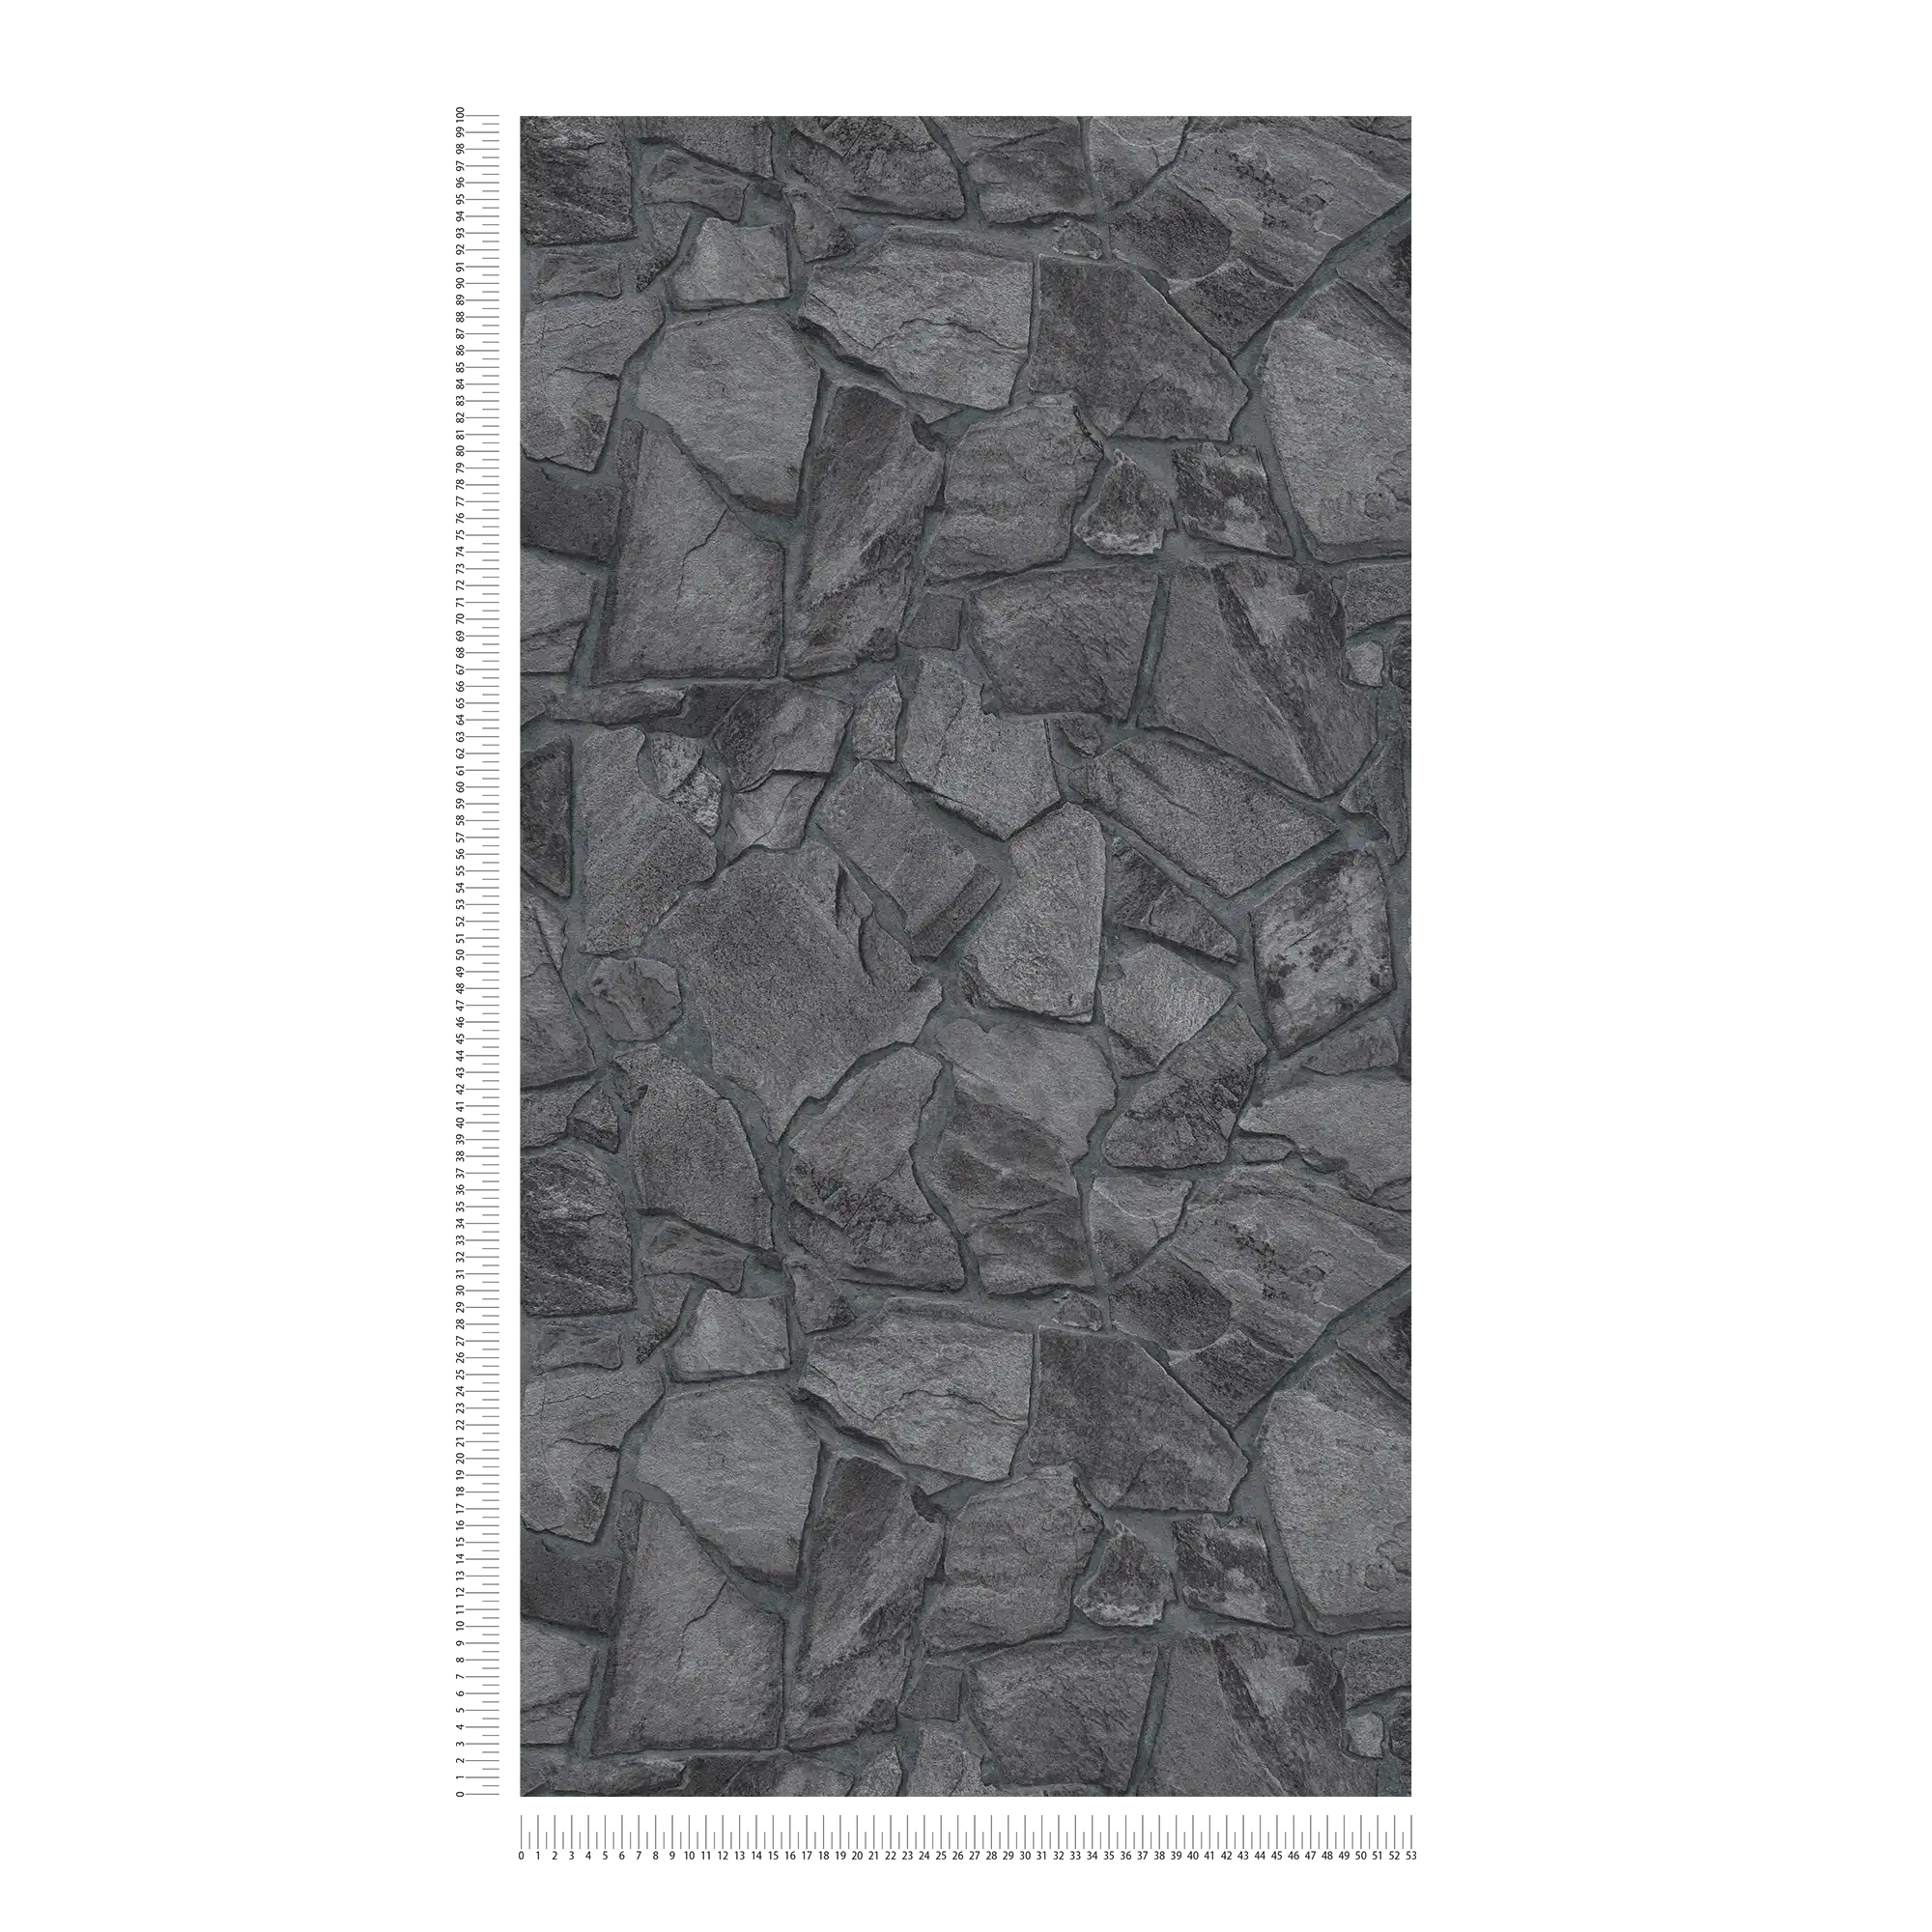             Wallpaper with black natural stone look
        